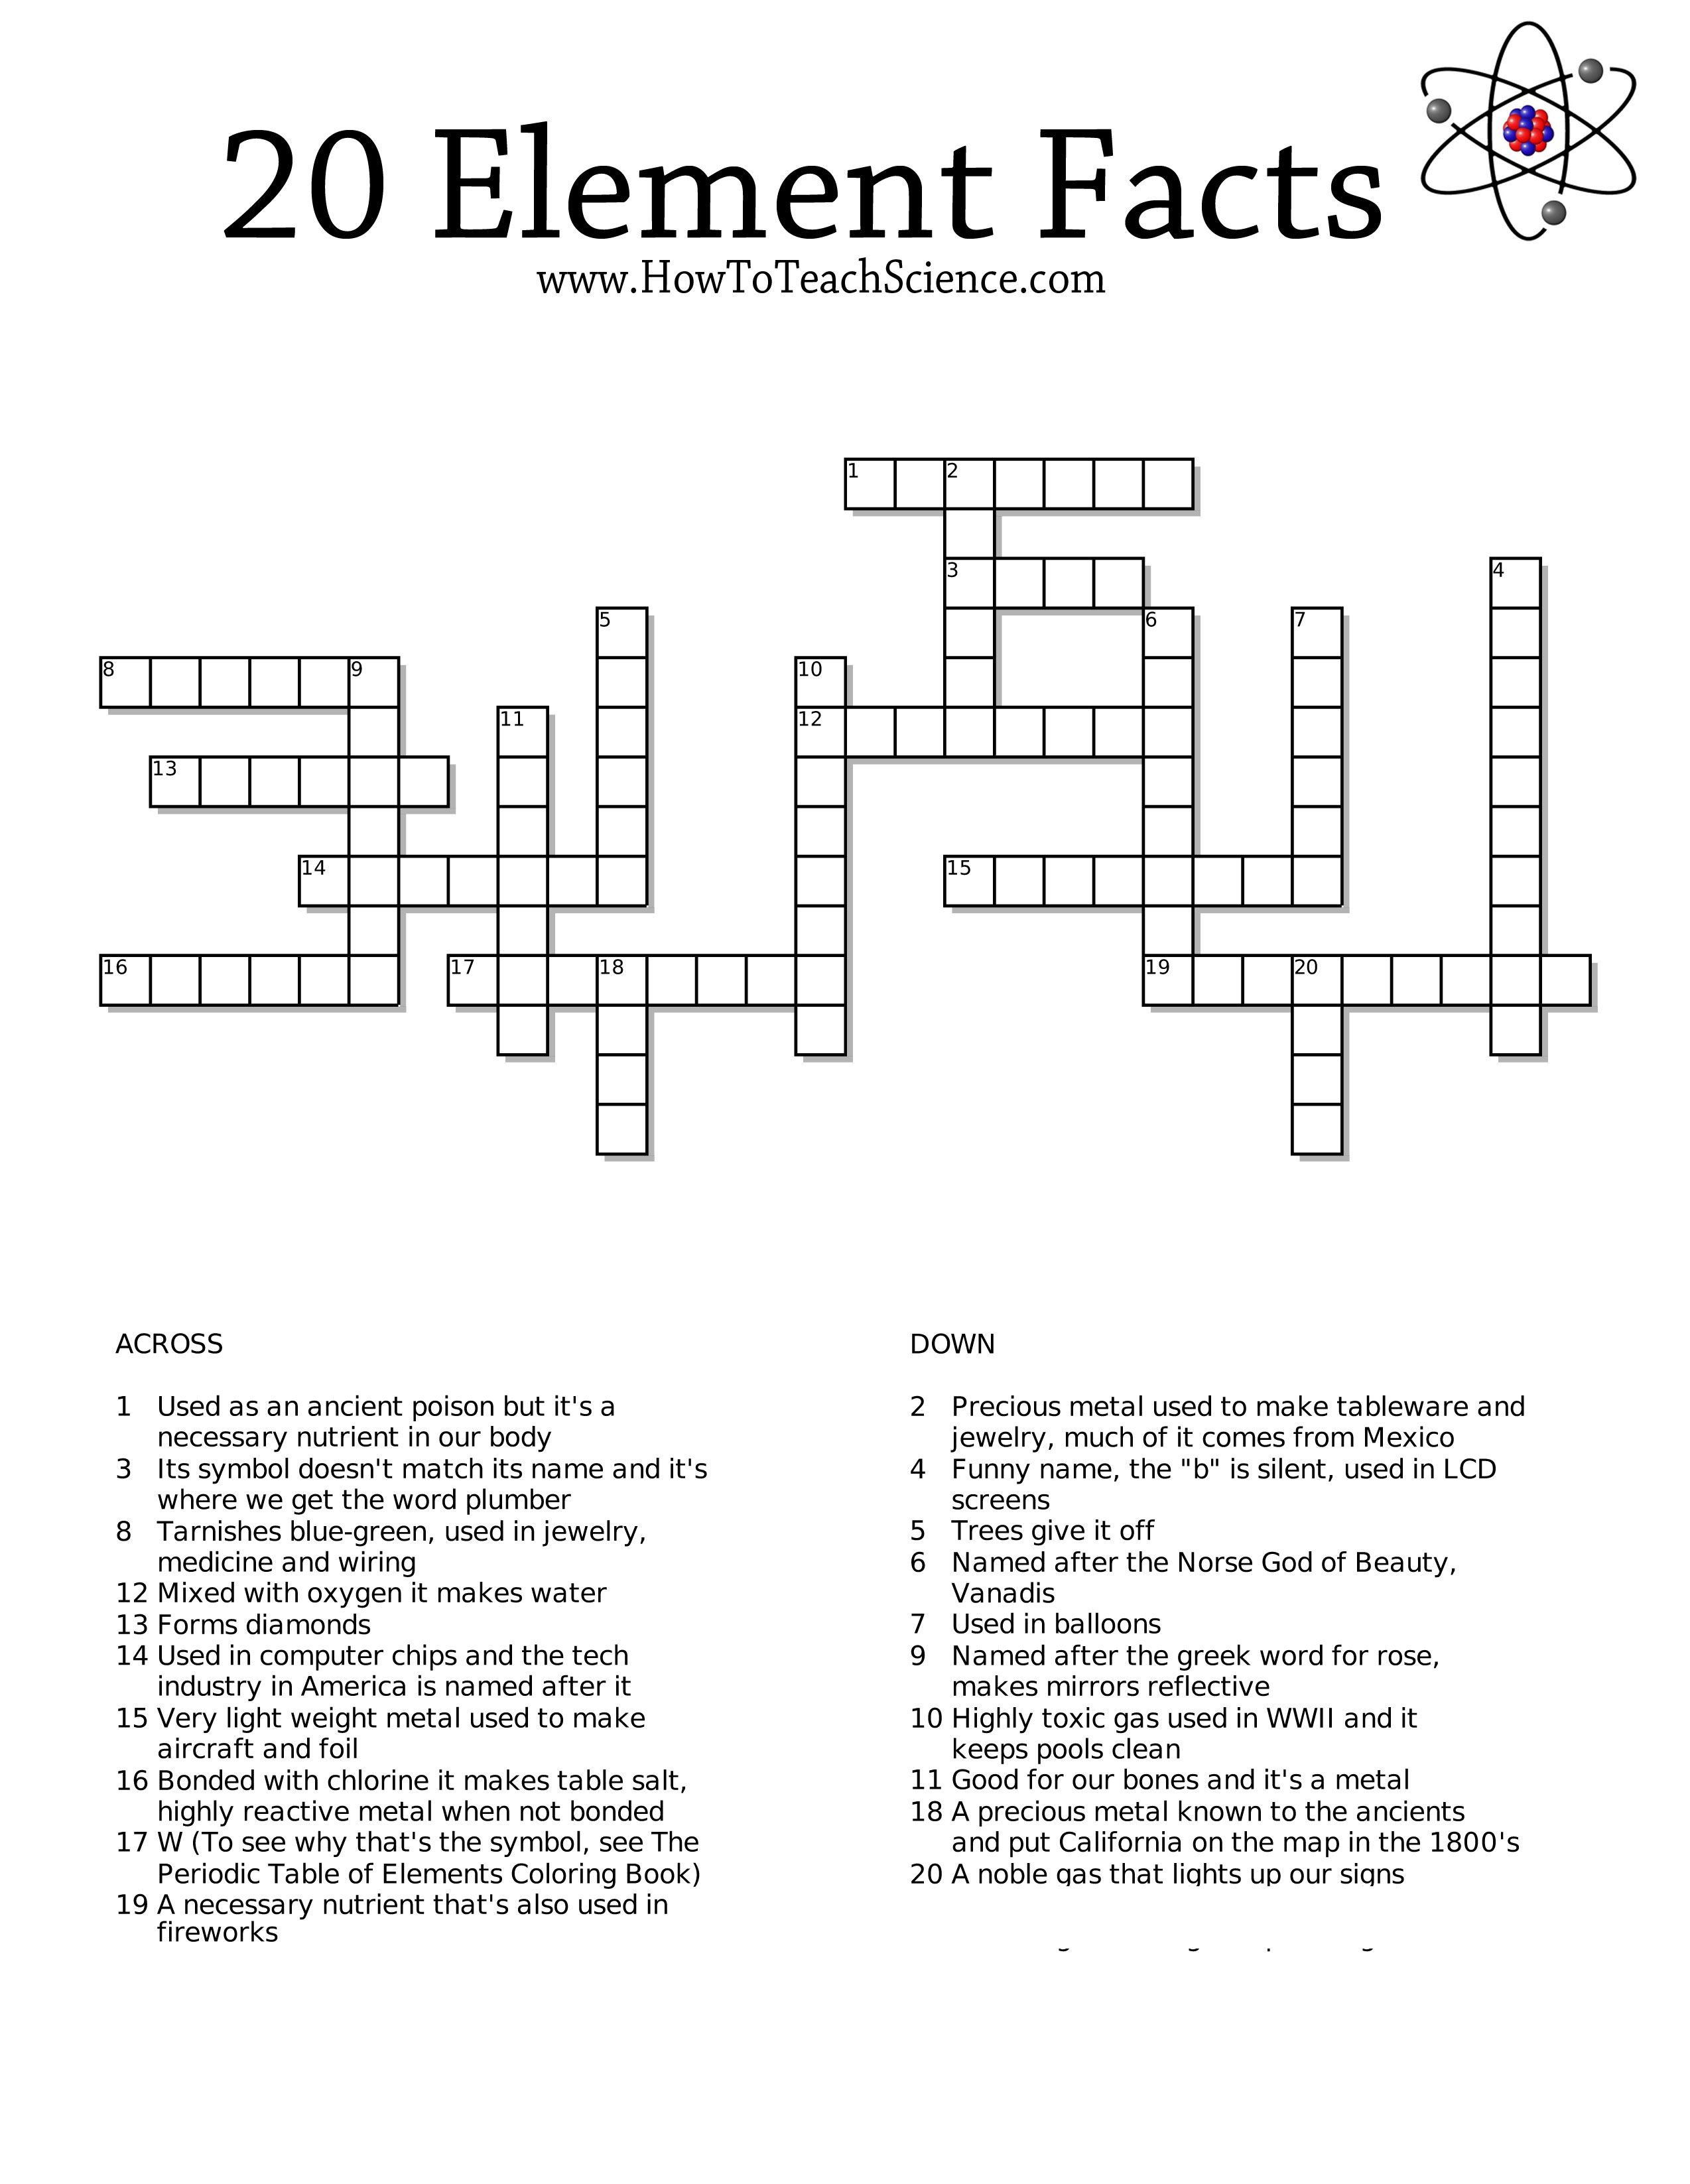 Free Crossword Printables On The Elements For 3Rd Grade Through High - Printable Crossword Puzzles For 7Th Graders